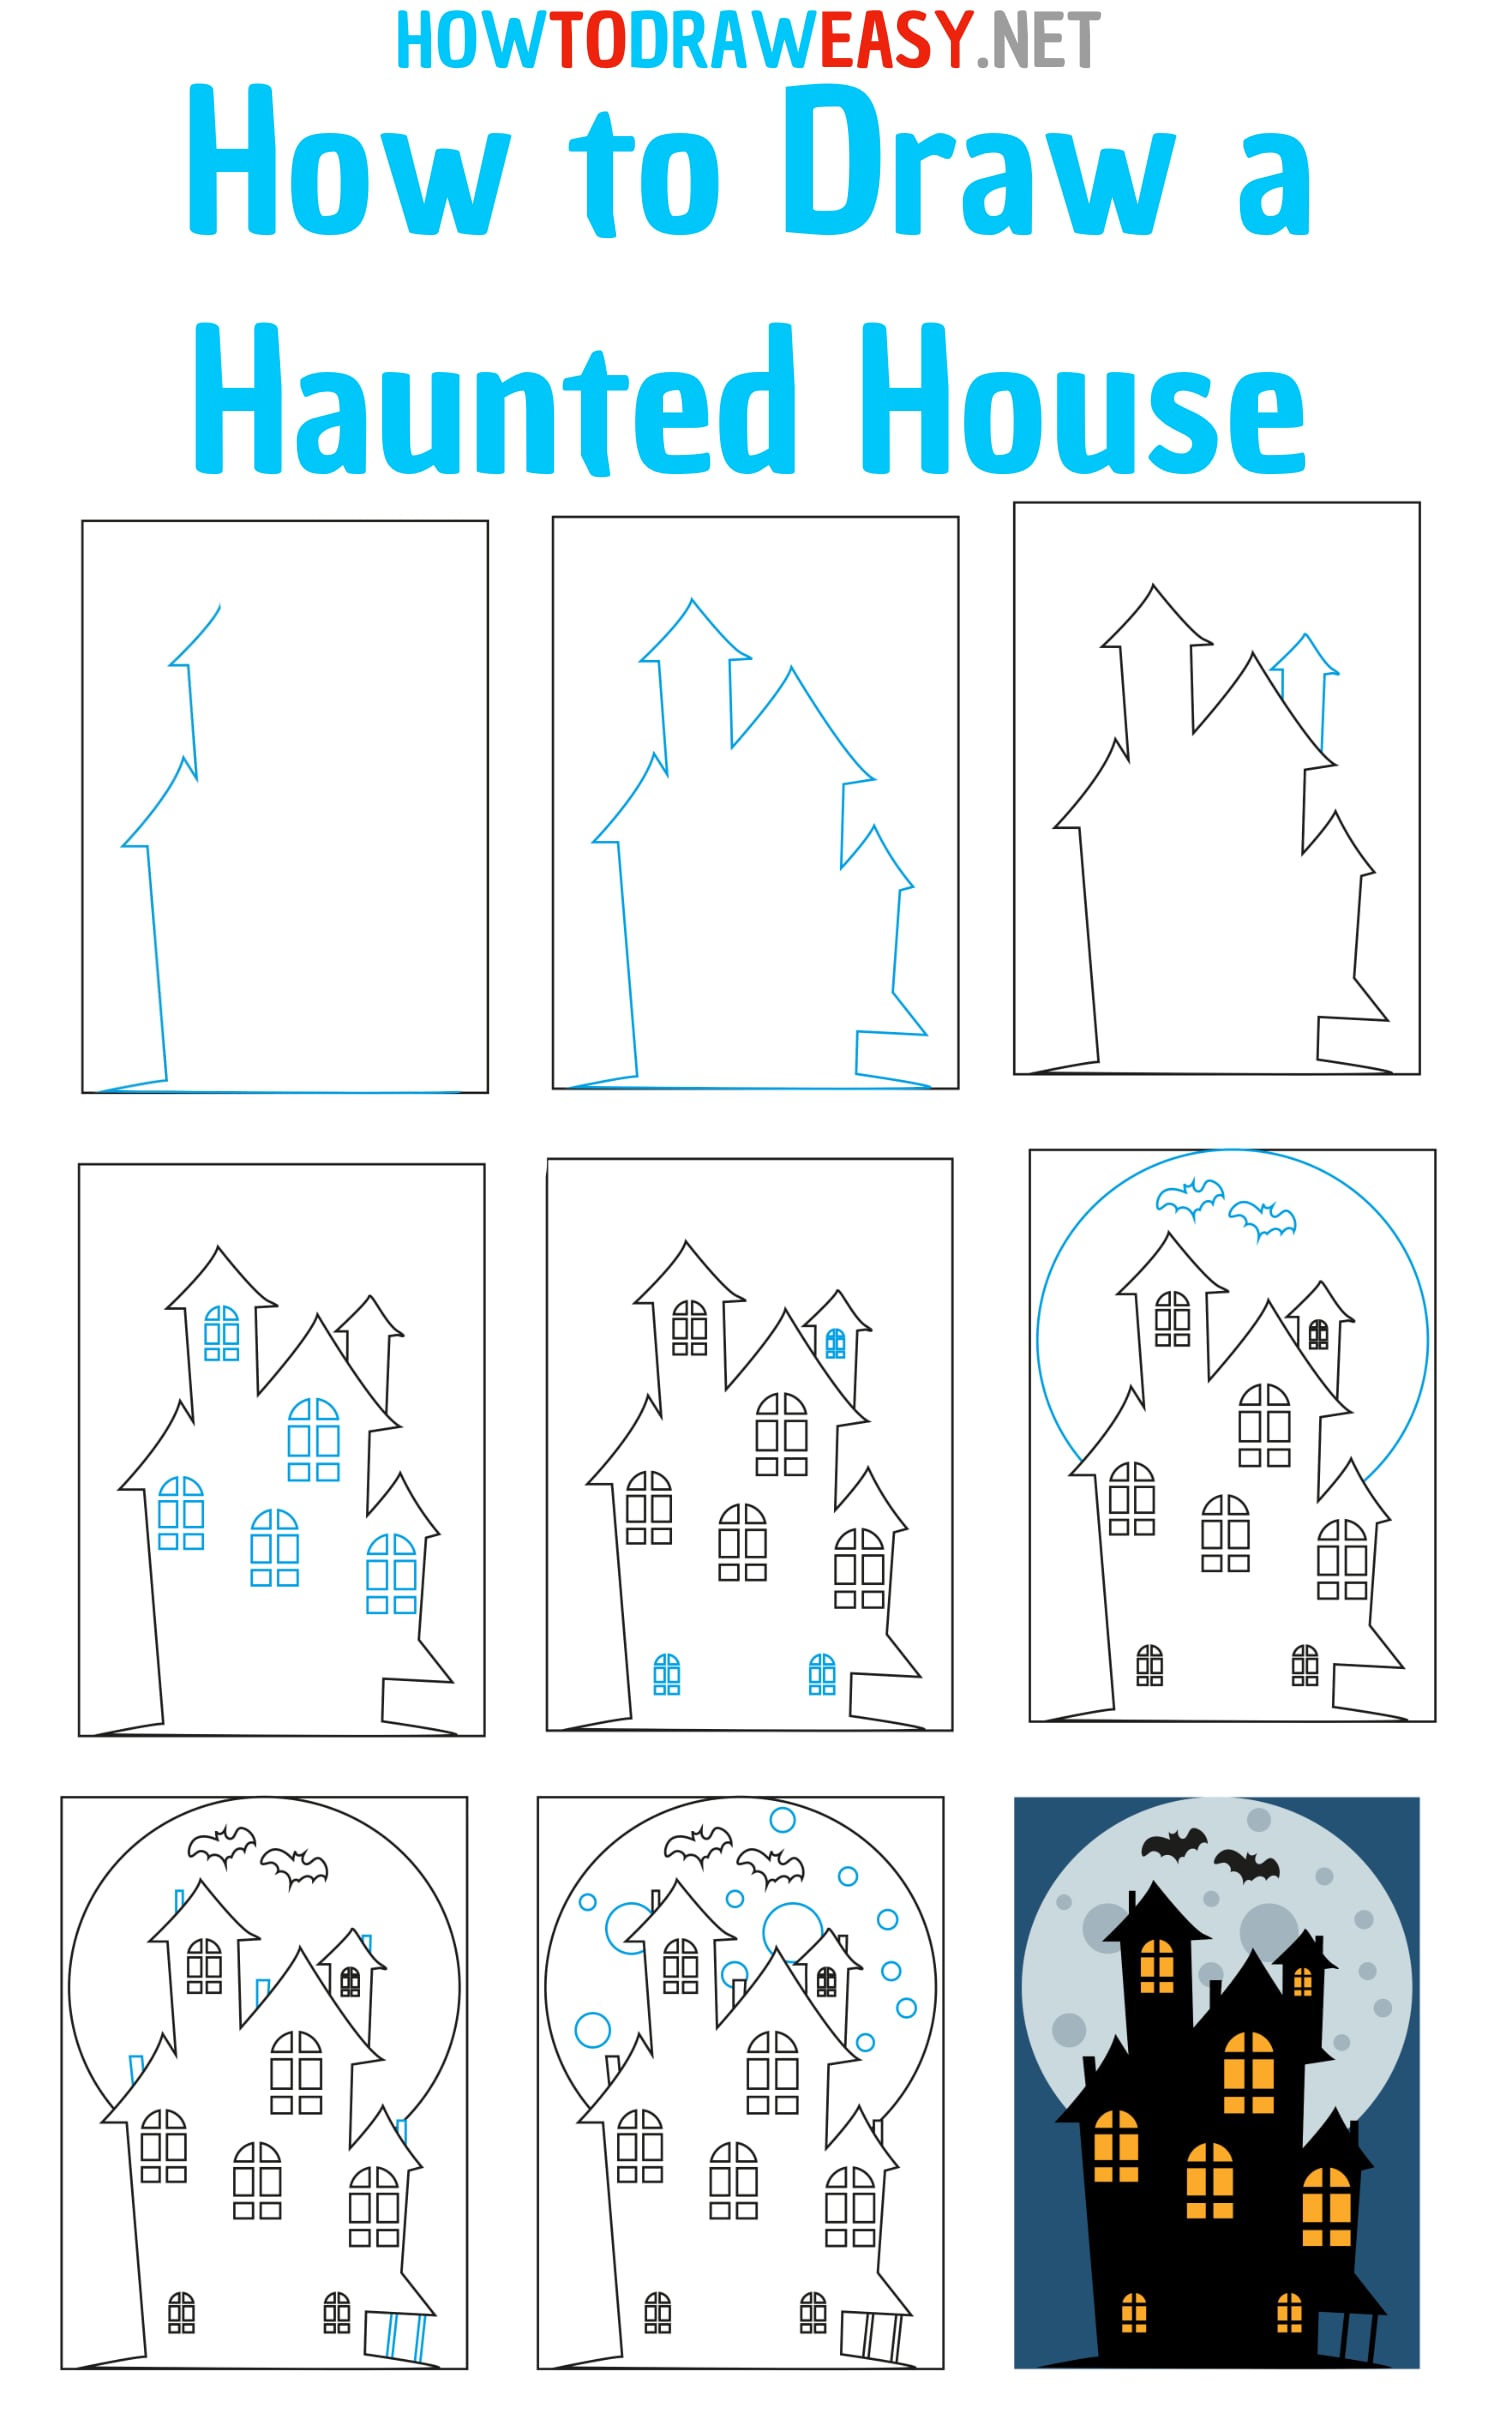 How to Draw a Haunted House Step by Step